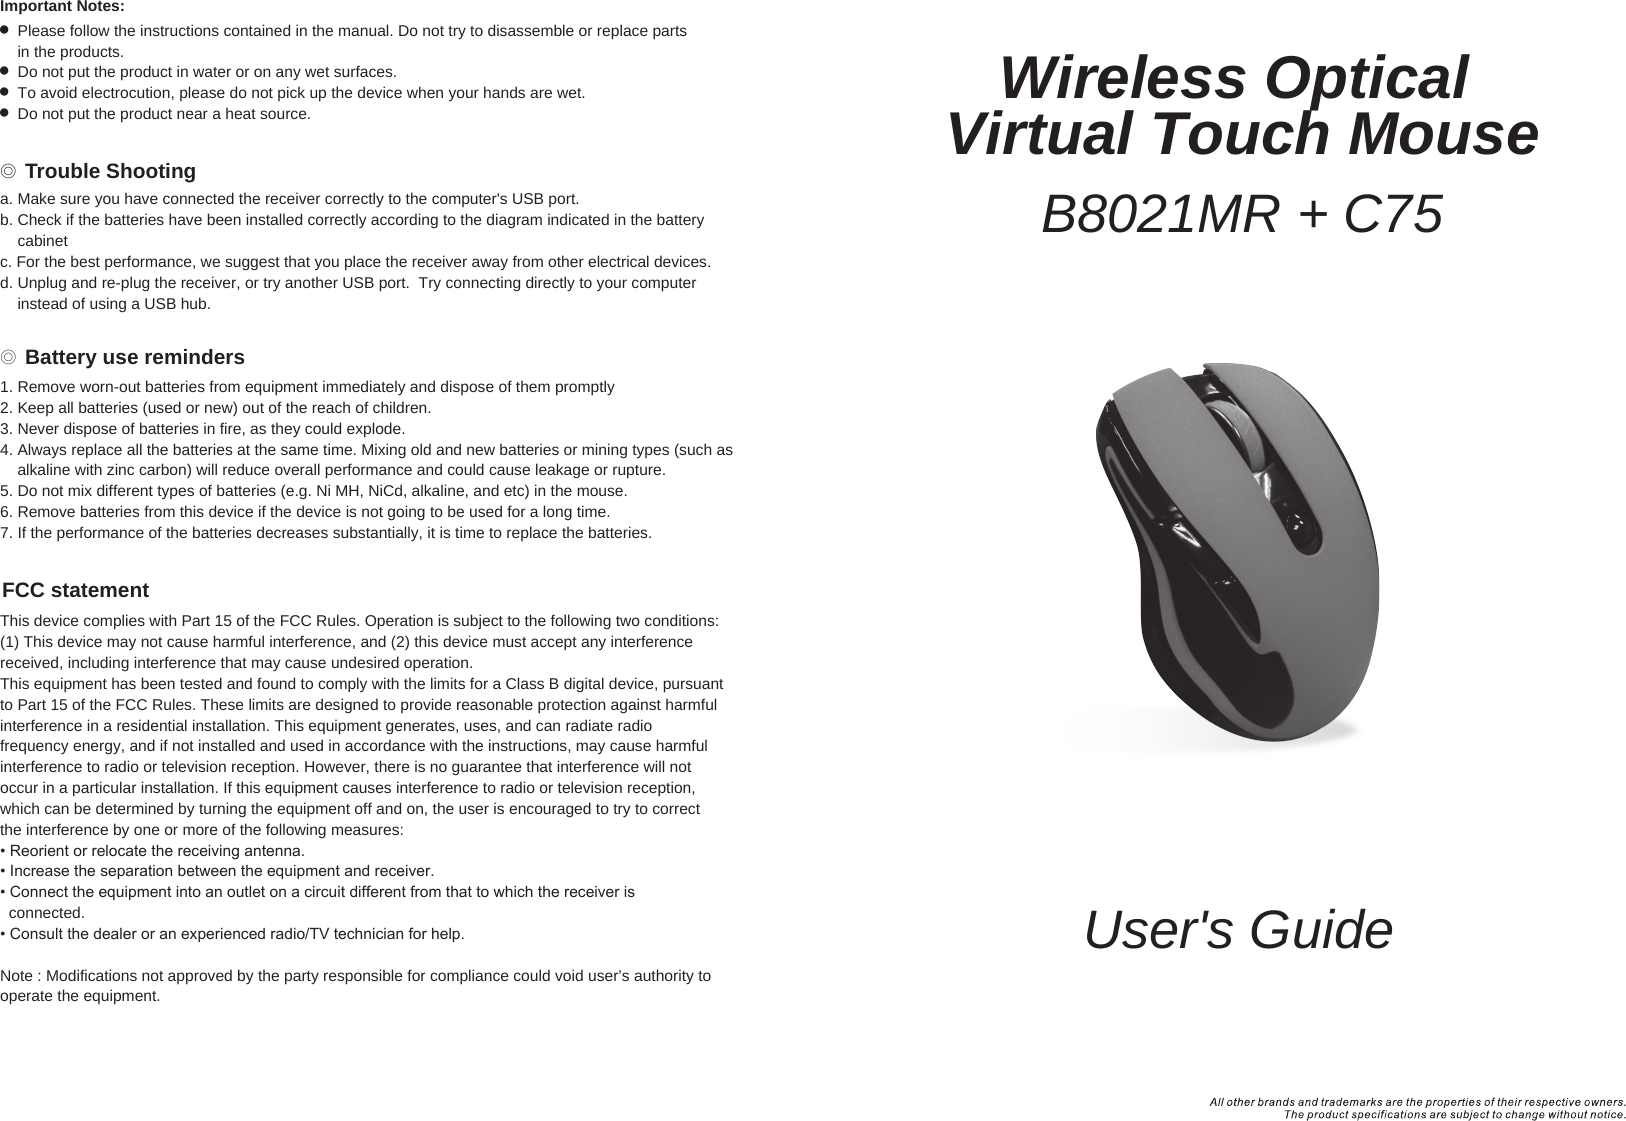 User&apos;s GuideWireless Optical Virtual Touch MouseB8021MR + C75◎ Battery use reminders◎ Trouble ShootingFCC statementImportant Notes:  Please follow the instructions contained in the manual. Do not try to disassemble or replace parts     in the products.  Do not put the product in water or on any wet surfaces.  To avoid electrocution, please do not pick up the device when your hands are wet.  Do not put the product near a heat source.1. Remove worn-out batteries from equipment immediately and dispose of them promptly2. Keep all batteries (used or new) out of the reach of children.3. Never dispose of batteries in fire, as they could explode.4. Always replace all the batteries at the same time. Mixing old and new batteries or mining types (such as     alkaline with zinc carbon) will reduce overall performance and could cause leakage or rupture.5. Do not mix different types of batteries (e.g. Ni MH, NiCd, alkaline, and etc) in the mouse.6. Remove batteries from this device if the device is not going to be used for a long time.7. If the performance of the batteries decreases substantially, it is time to replace the batteries.This device complies with Part 15 of the FCC Rules. Operation is subject to the following two conditions:(1) This device may not cause harmful interference, and (2) this device must accept any interferencereceived, including interference that may cause undesired operation.This equipment has been tested and found to comply with the limits for a Class B digital device, pursuantto Part 15 of the FCC Rules. These limits are designed to provide reasonable protection against harmfulinterference in a residential installation. This equipment generates, uses, and can radiate radiofrequency energy, and if not installed and used in accordance with the instructions, may cause harmfulinterference to radio or television reception. However, there is no guarantee that interference will notoccur in a particular installation. If this equipment causes interference to radio or television reception,which can be determined by turning the equipment off and on, the user is encouraged to try to correctthe interference by one or more of the following measures:• Reorient or relocate the receiving antenna.• Increase the separation between the equipment and receiver.• Connect the equipment into an outlet on a circuit different from that to which the receiver is  connected.• Consult the dealer or an experienced radio/TV technician for help.Note : Modifications not approved by the party responsible for compliance could void user’s authority to operate the equipment.a. Make sure you have connected the receiver correctly to the computer&apos;s USB port.b. Check if the batteries have been installed correctly according to the diagram indicated in the battery     cabinetc. For the best performance, we suggest that you place the receiver away from other electrical devices.d. Unplug and re-plug the receiver, or try another USB port.  Try connecting directly to your computer     instead of using a USB hub.